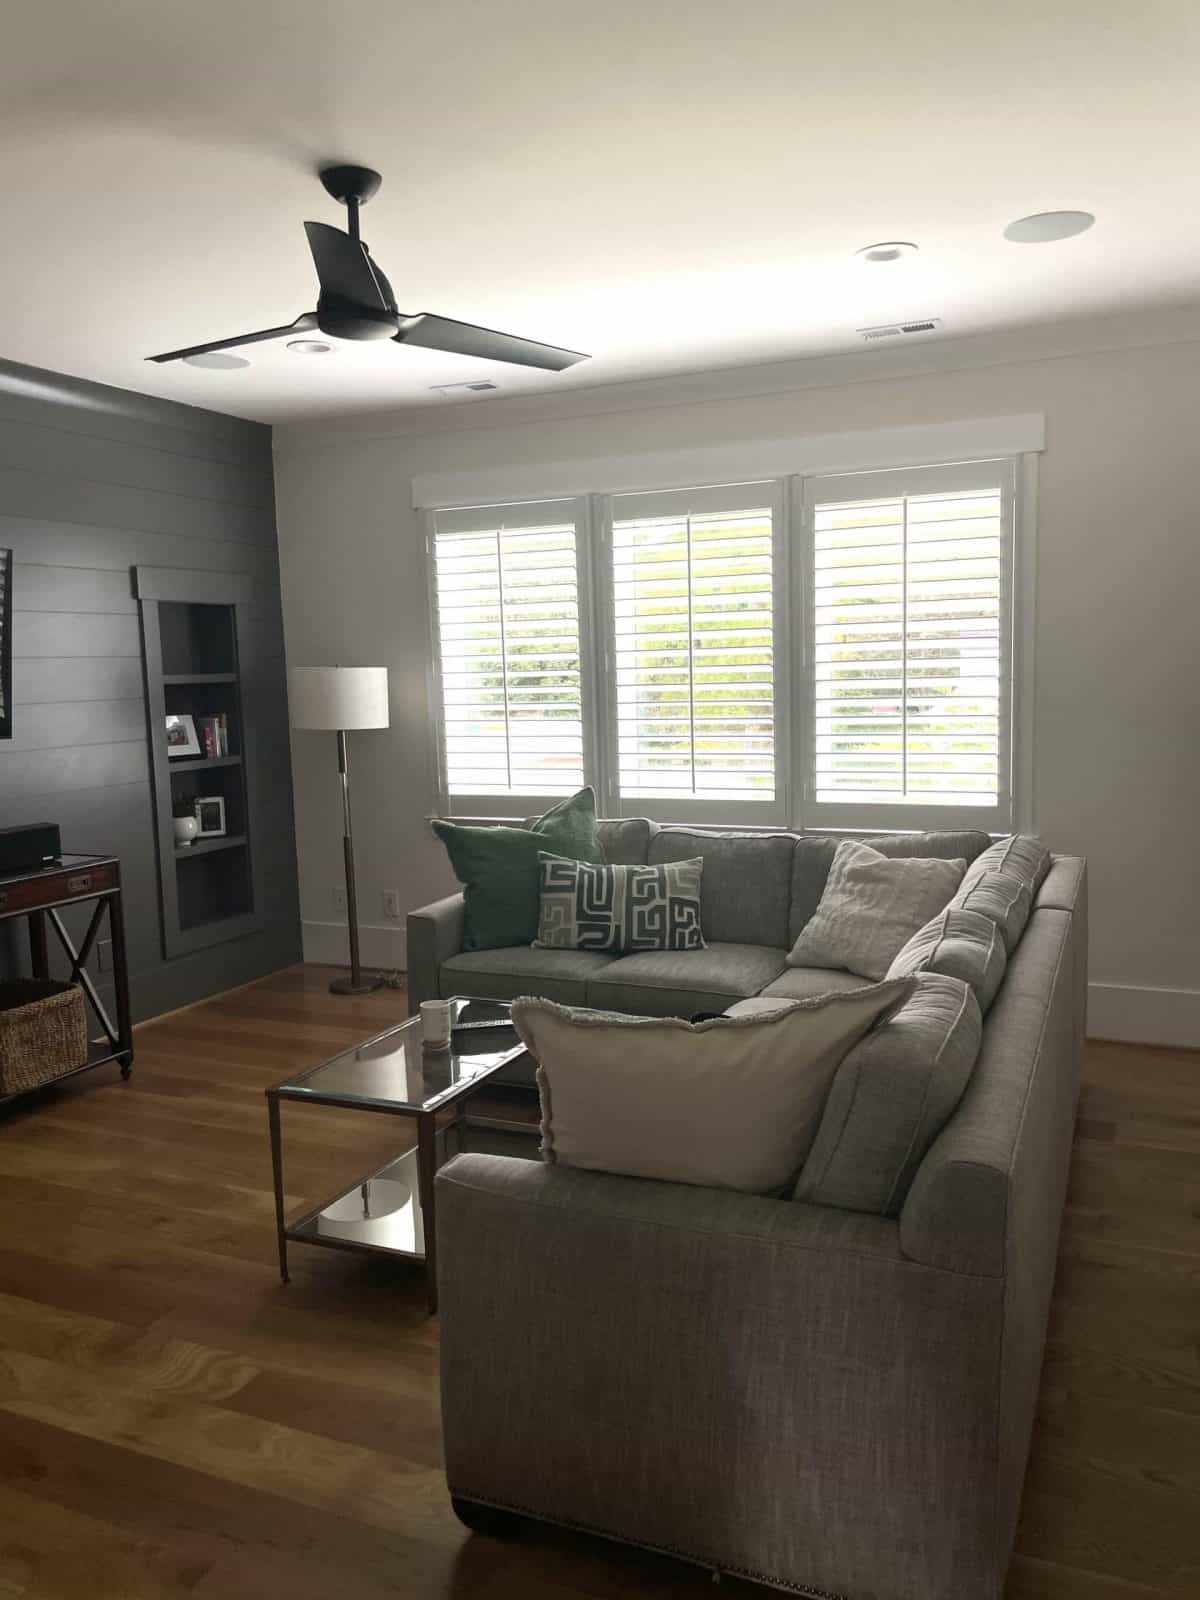 White Living Room Plantation Shutters - After